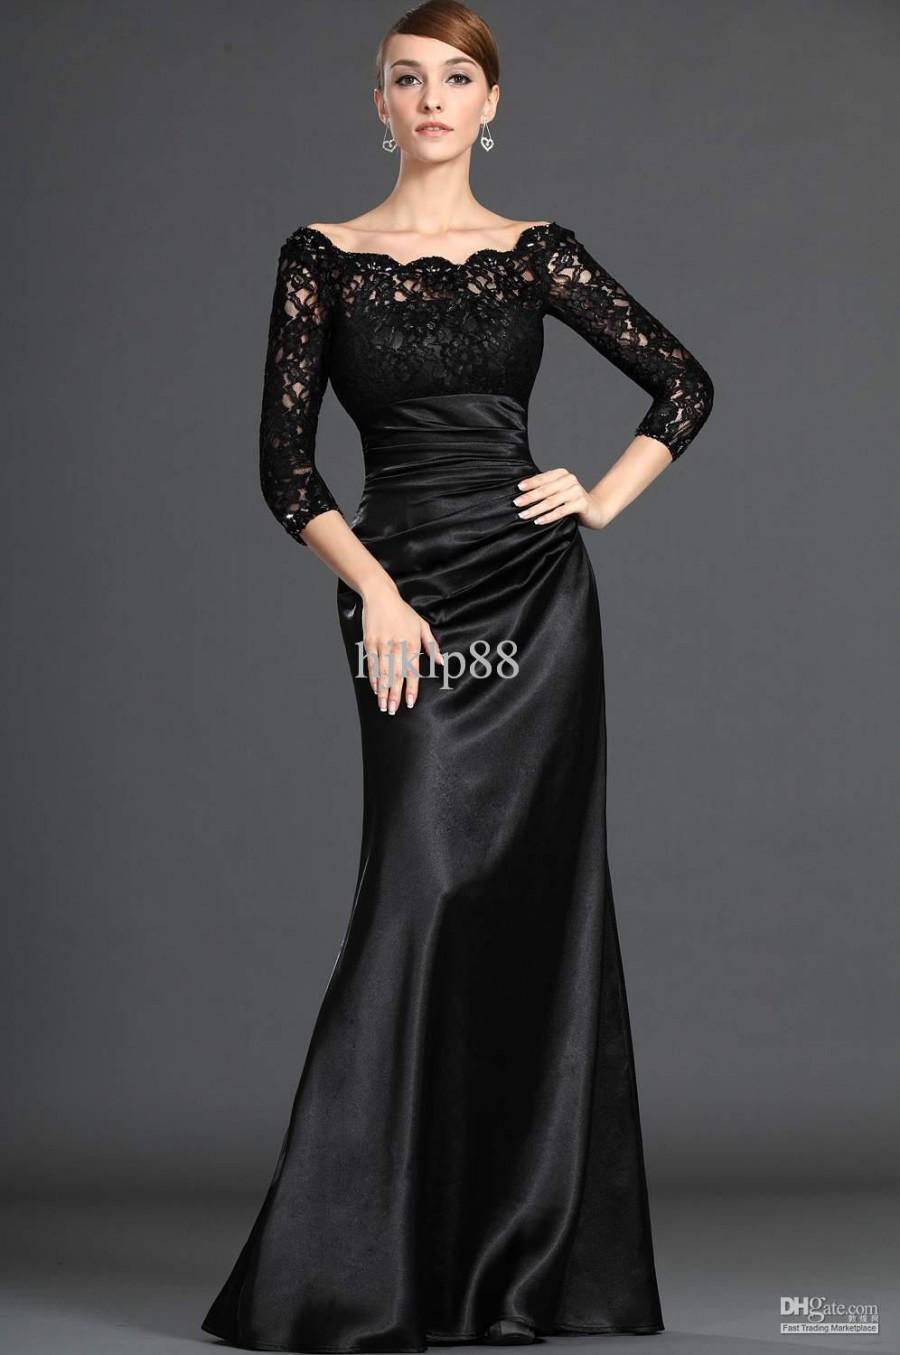 Mariage - 2014 New Custom Made Off-Shoulder 3/4Long Sleeve Black Lace Satin A-Line Mother Evening Dresses /Mother of the Bride Dresses Online with $89.26/Piece on Hjklp88's Store 